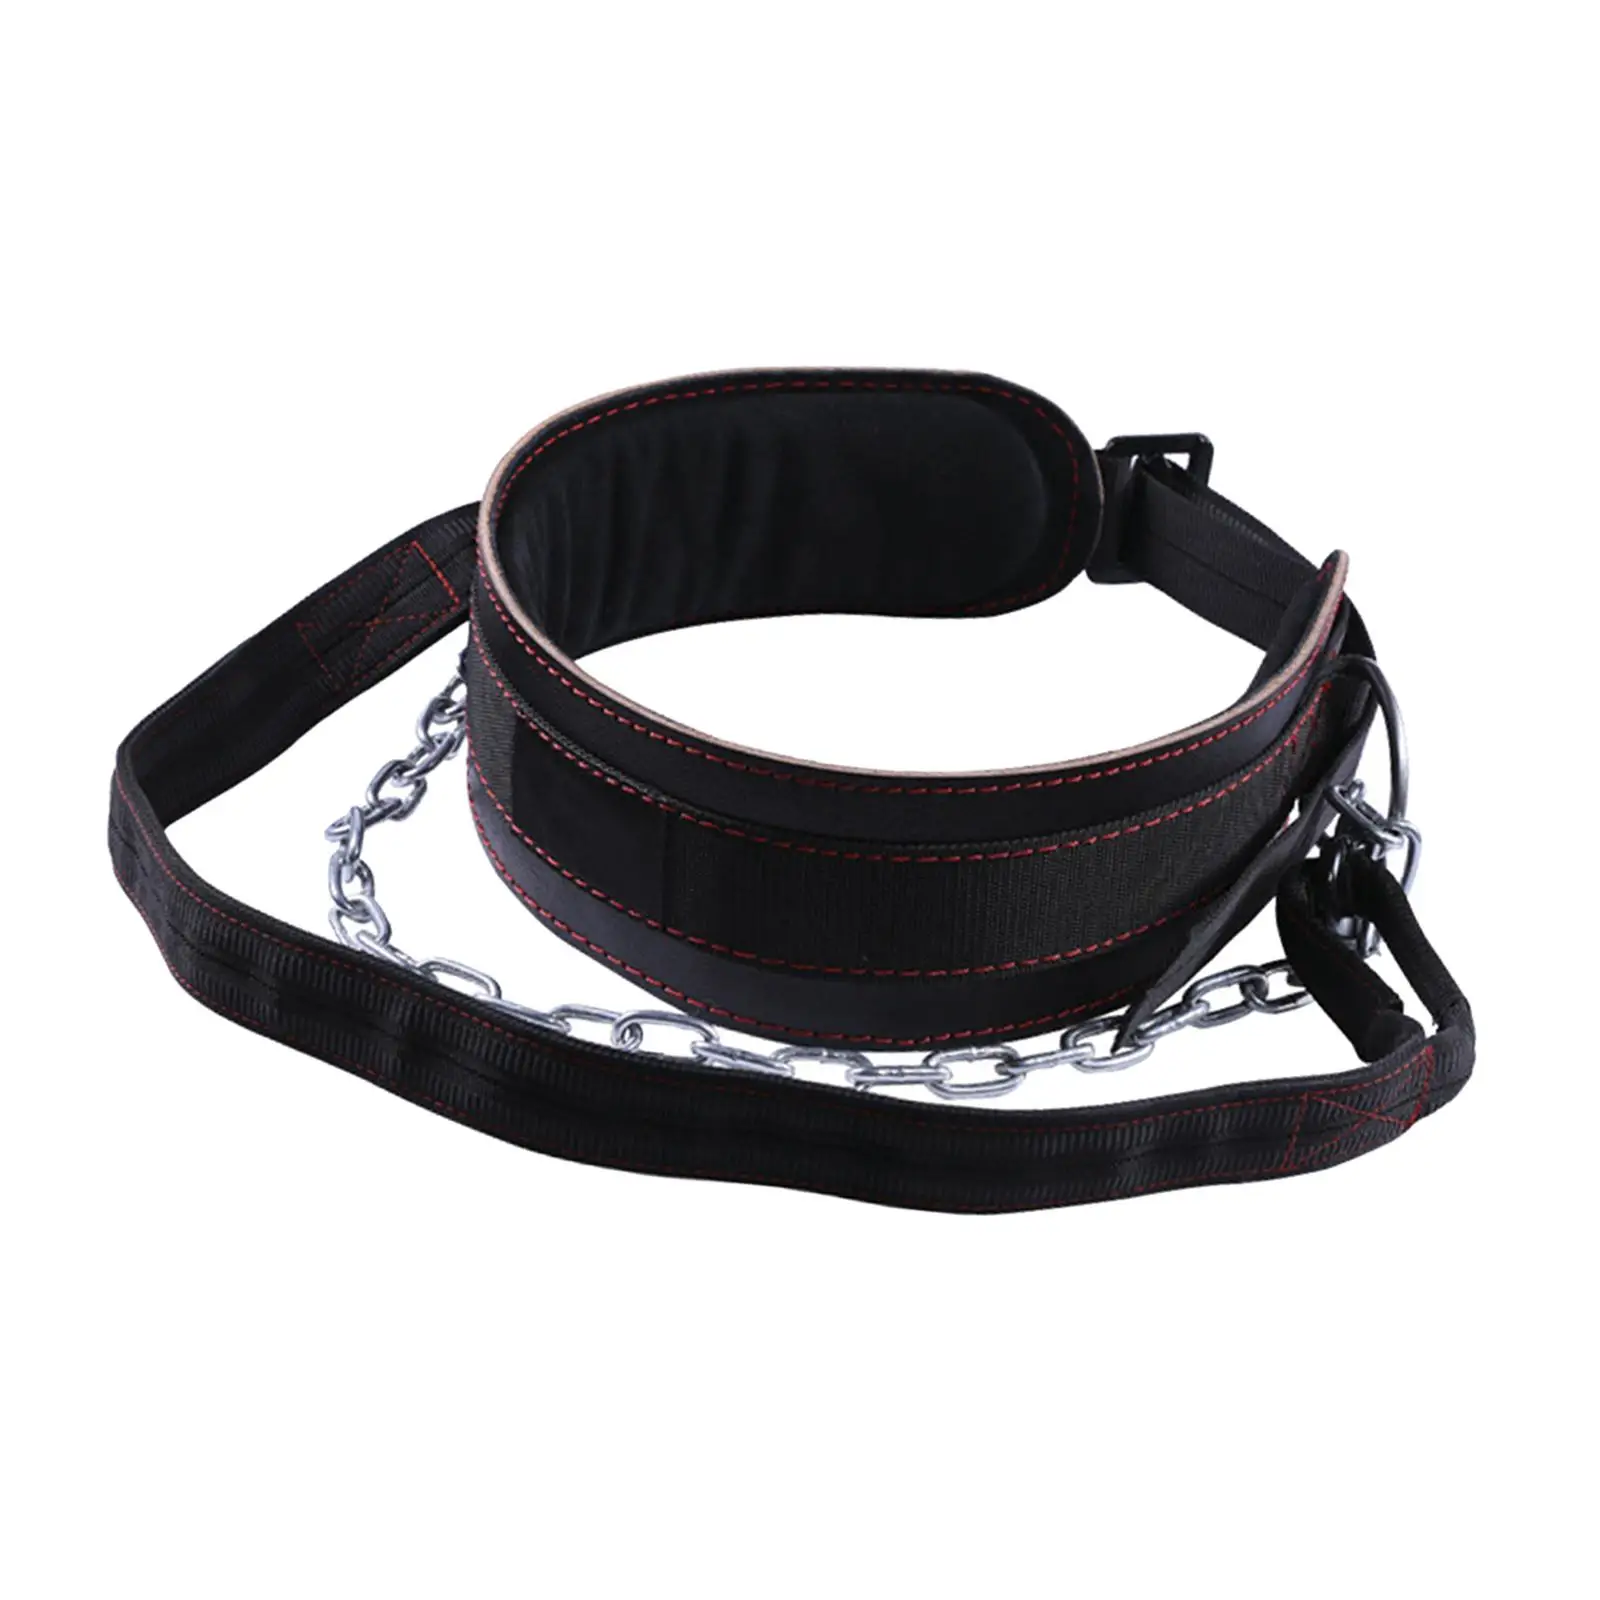 Pull Ups Belt with Lifting Chain Comfortable Heavy Duty Exercise Weightlifting